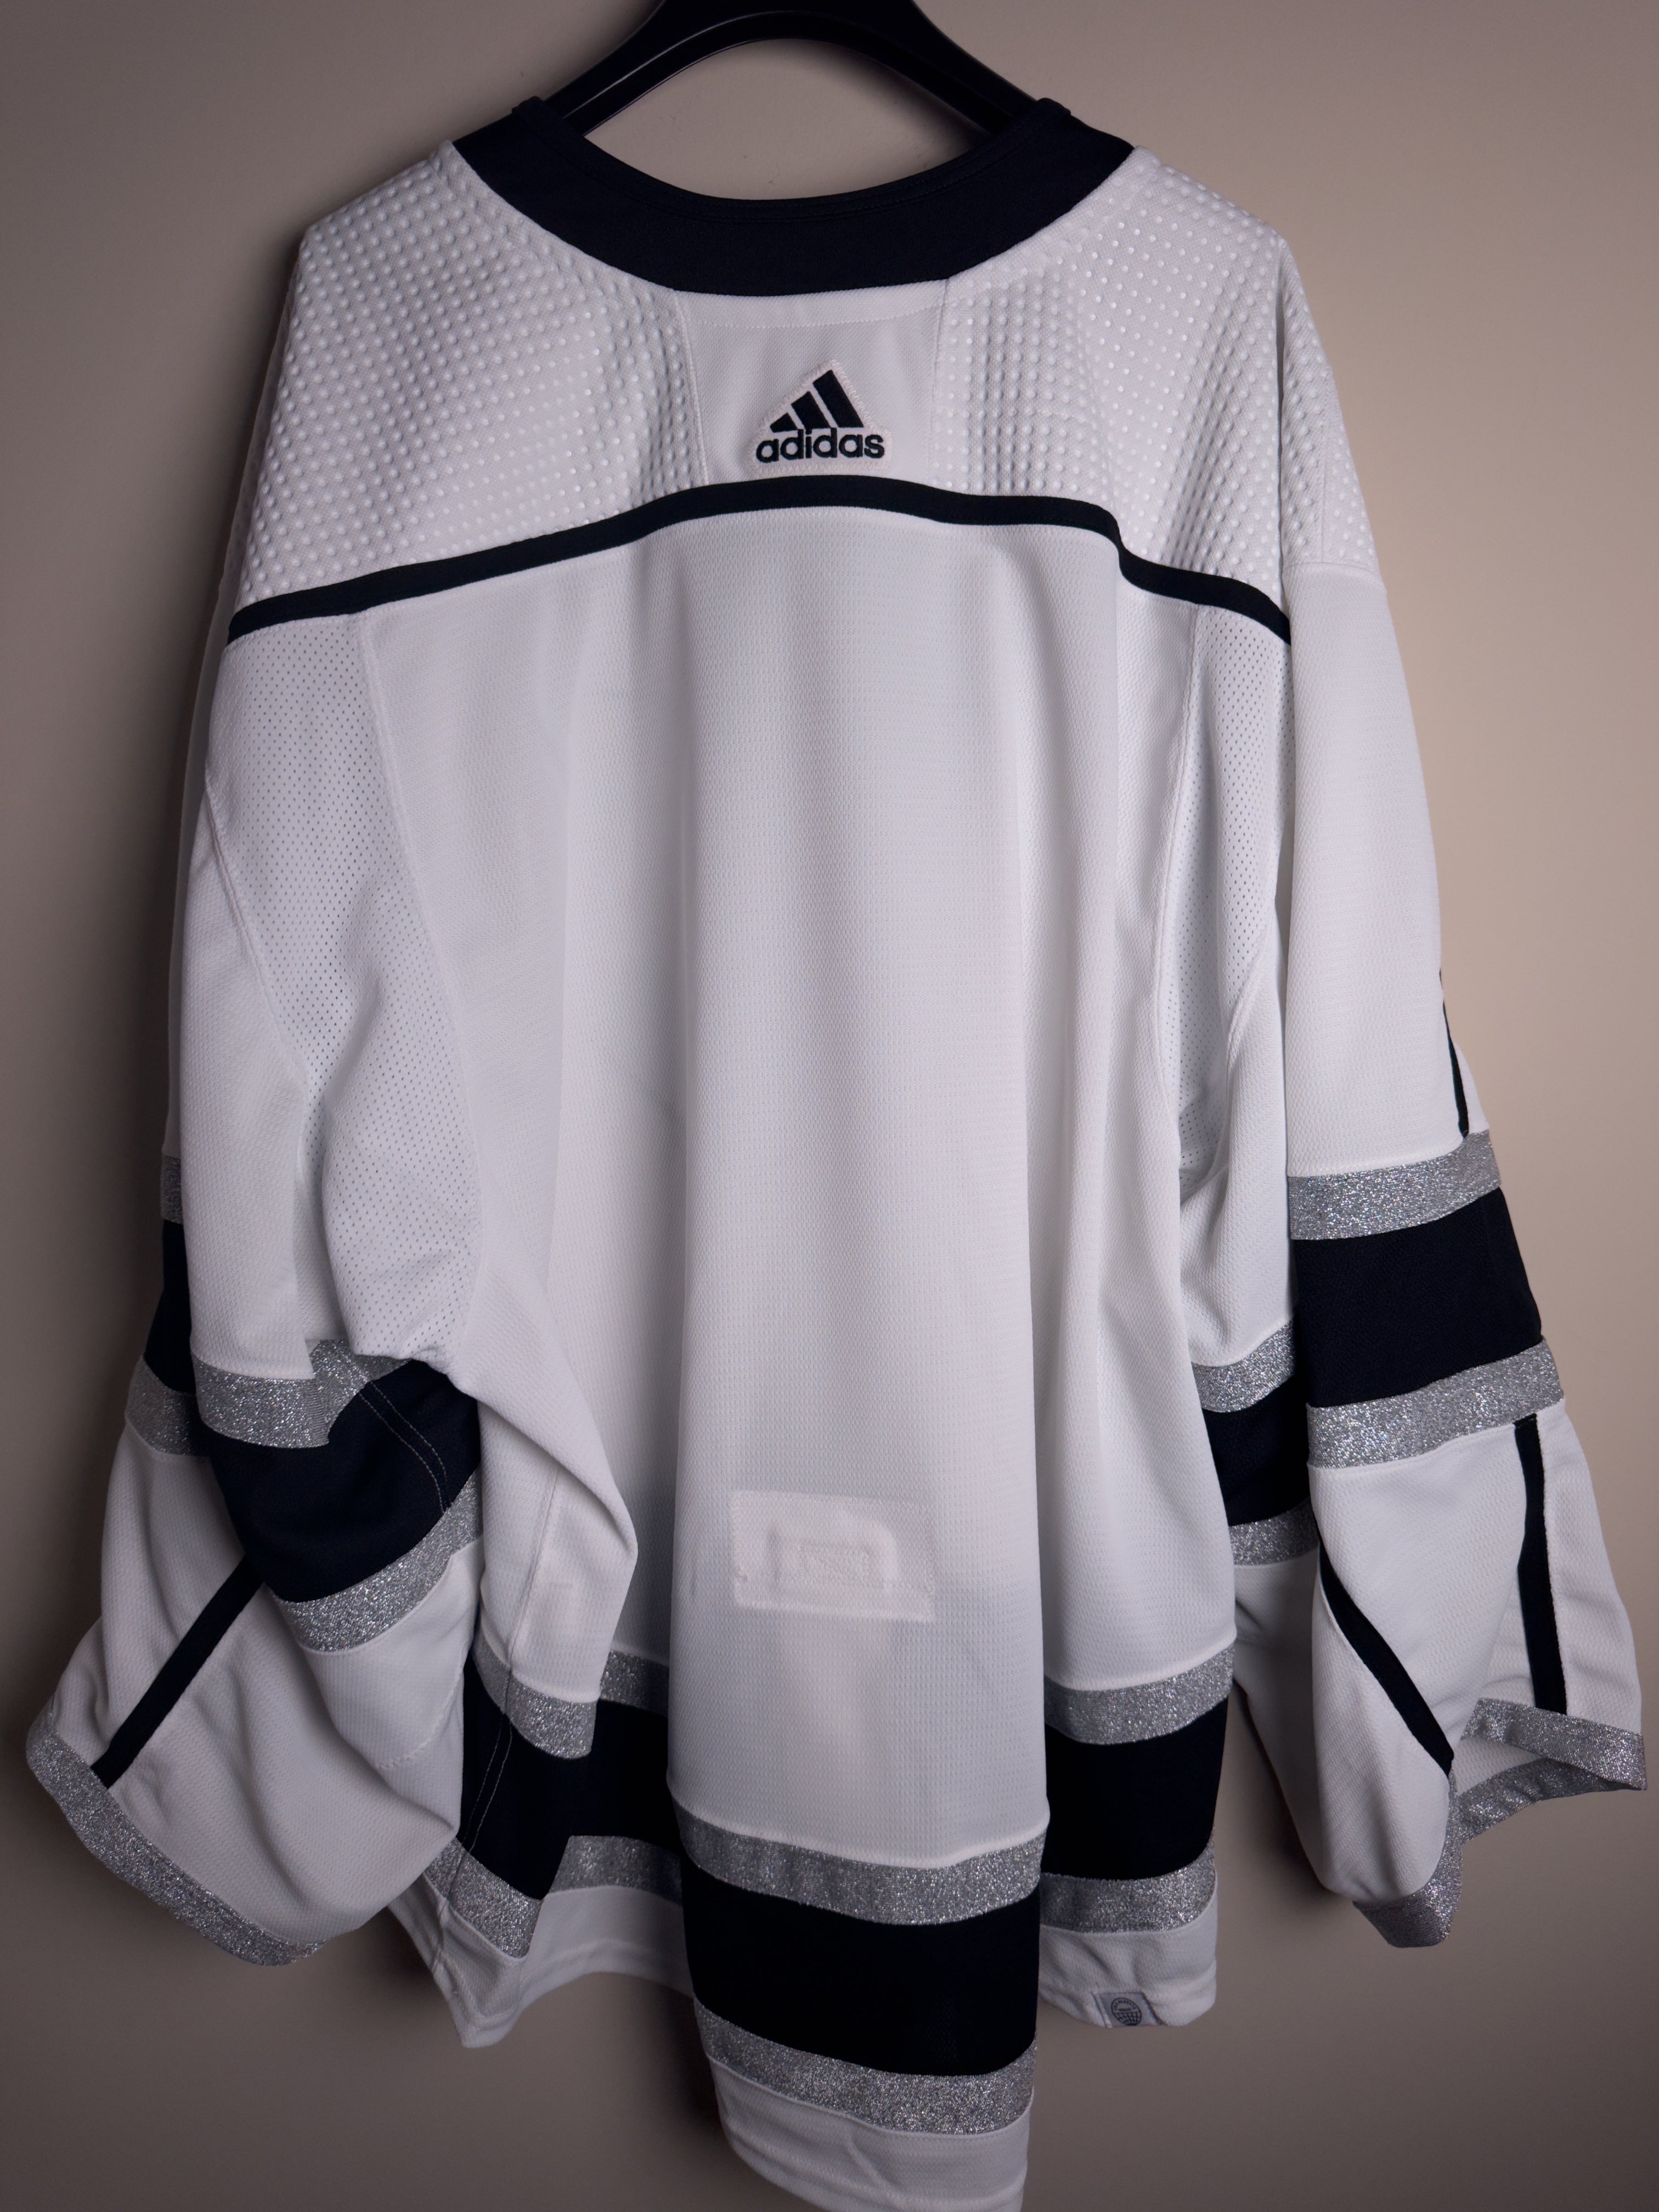 Los Angeles Kings NHL Adidas Primegreen MiC Team Issued Away Jersey Size 60G (Goalie Cut)